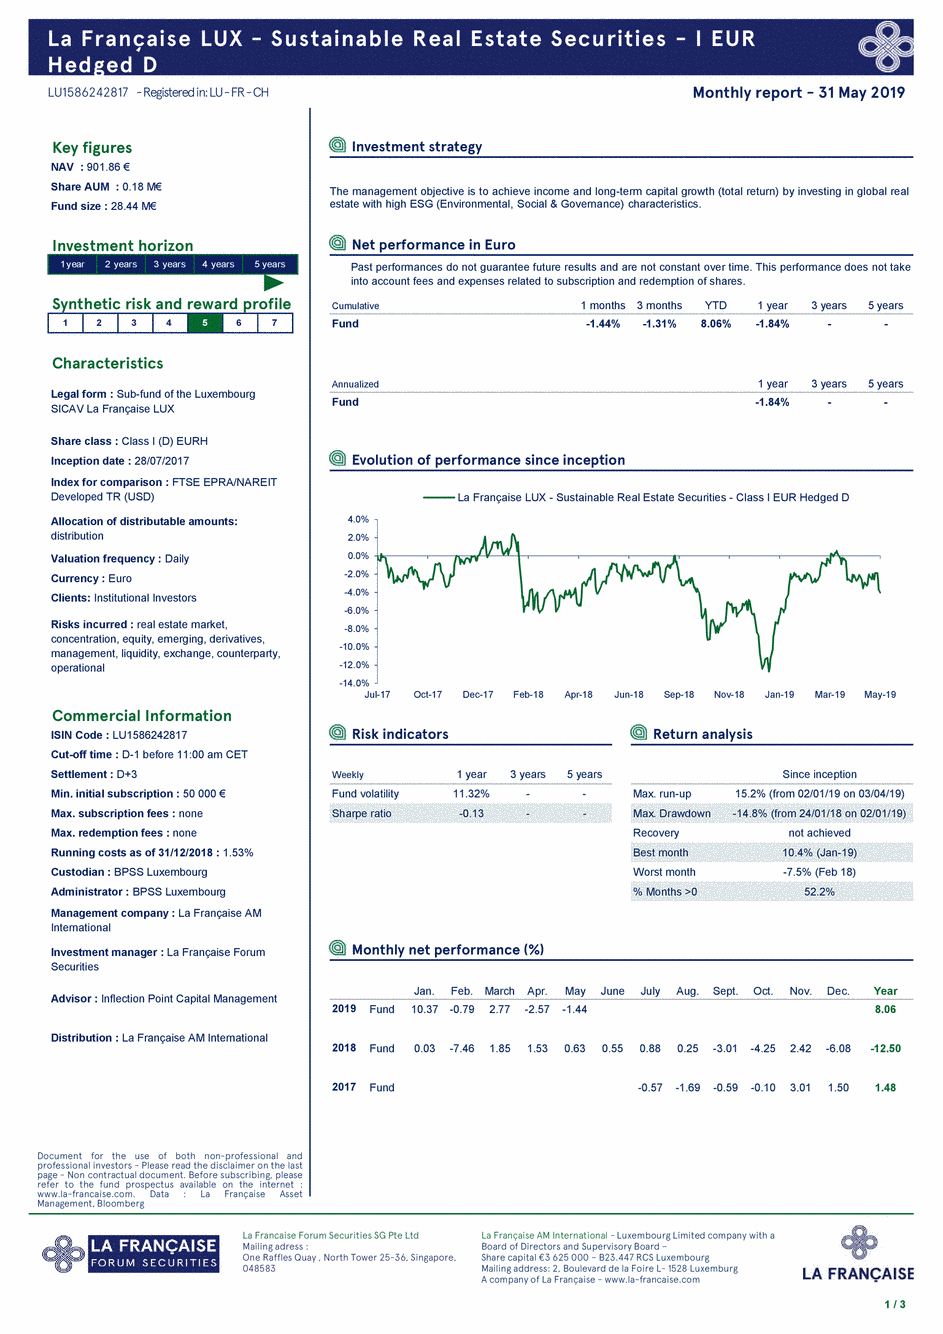 Reporting La Française LUX - Sustainable Real Estate Securities - Class I EUR Hedged D - 31/12/2018 - Anglais